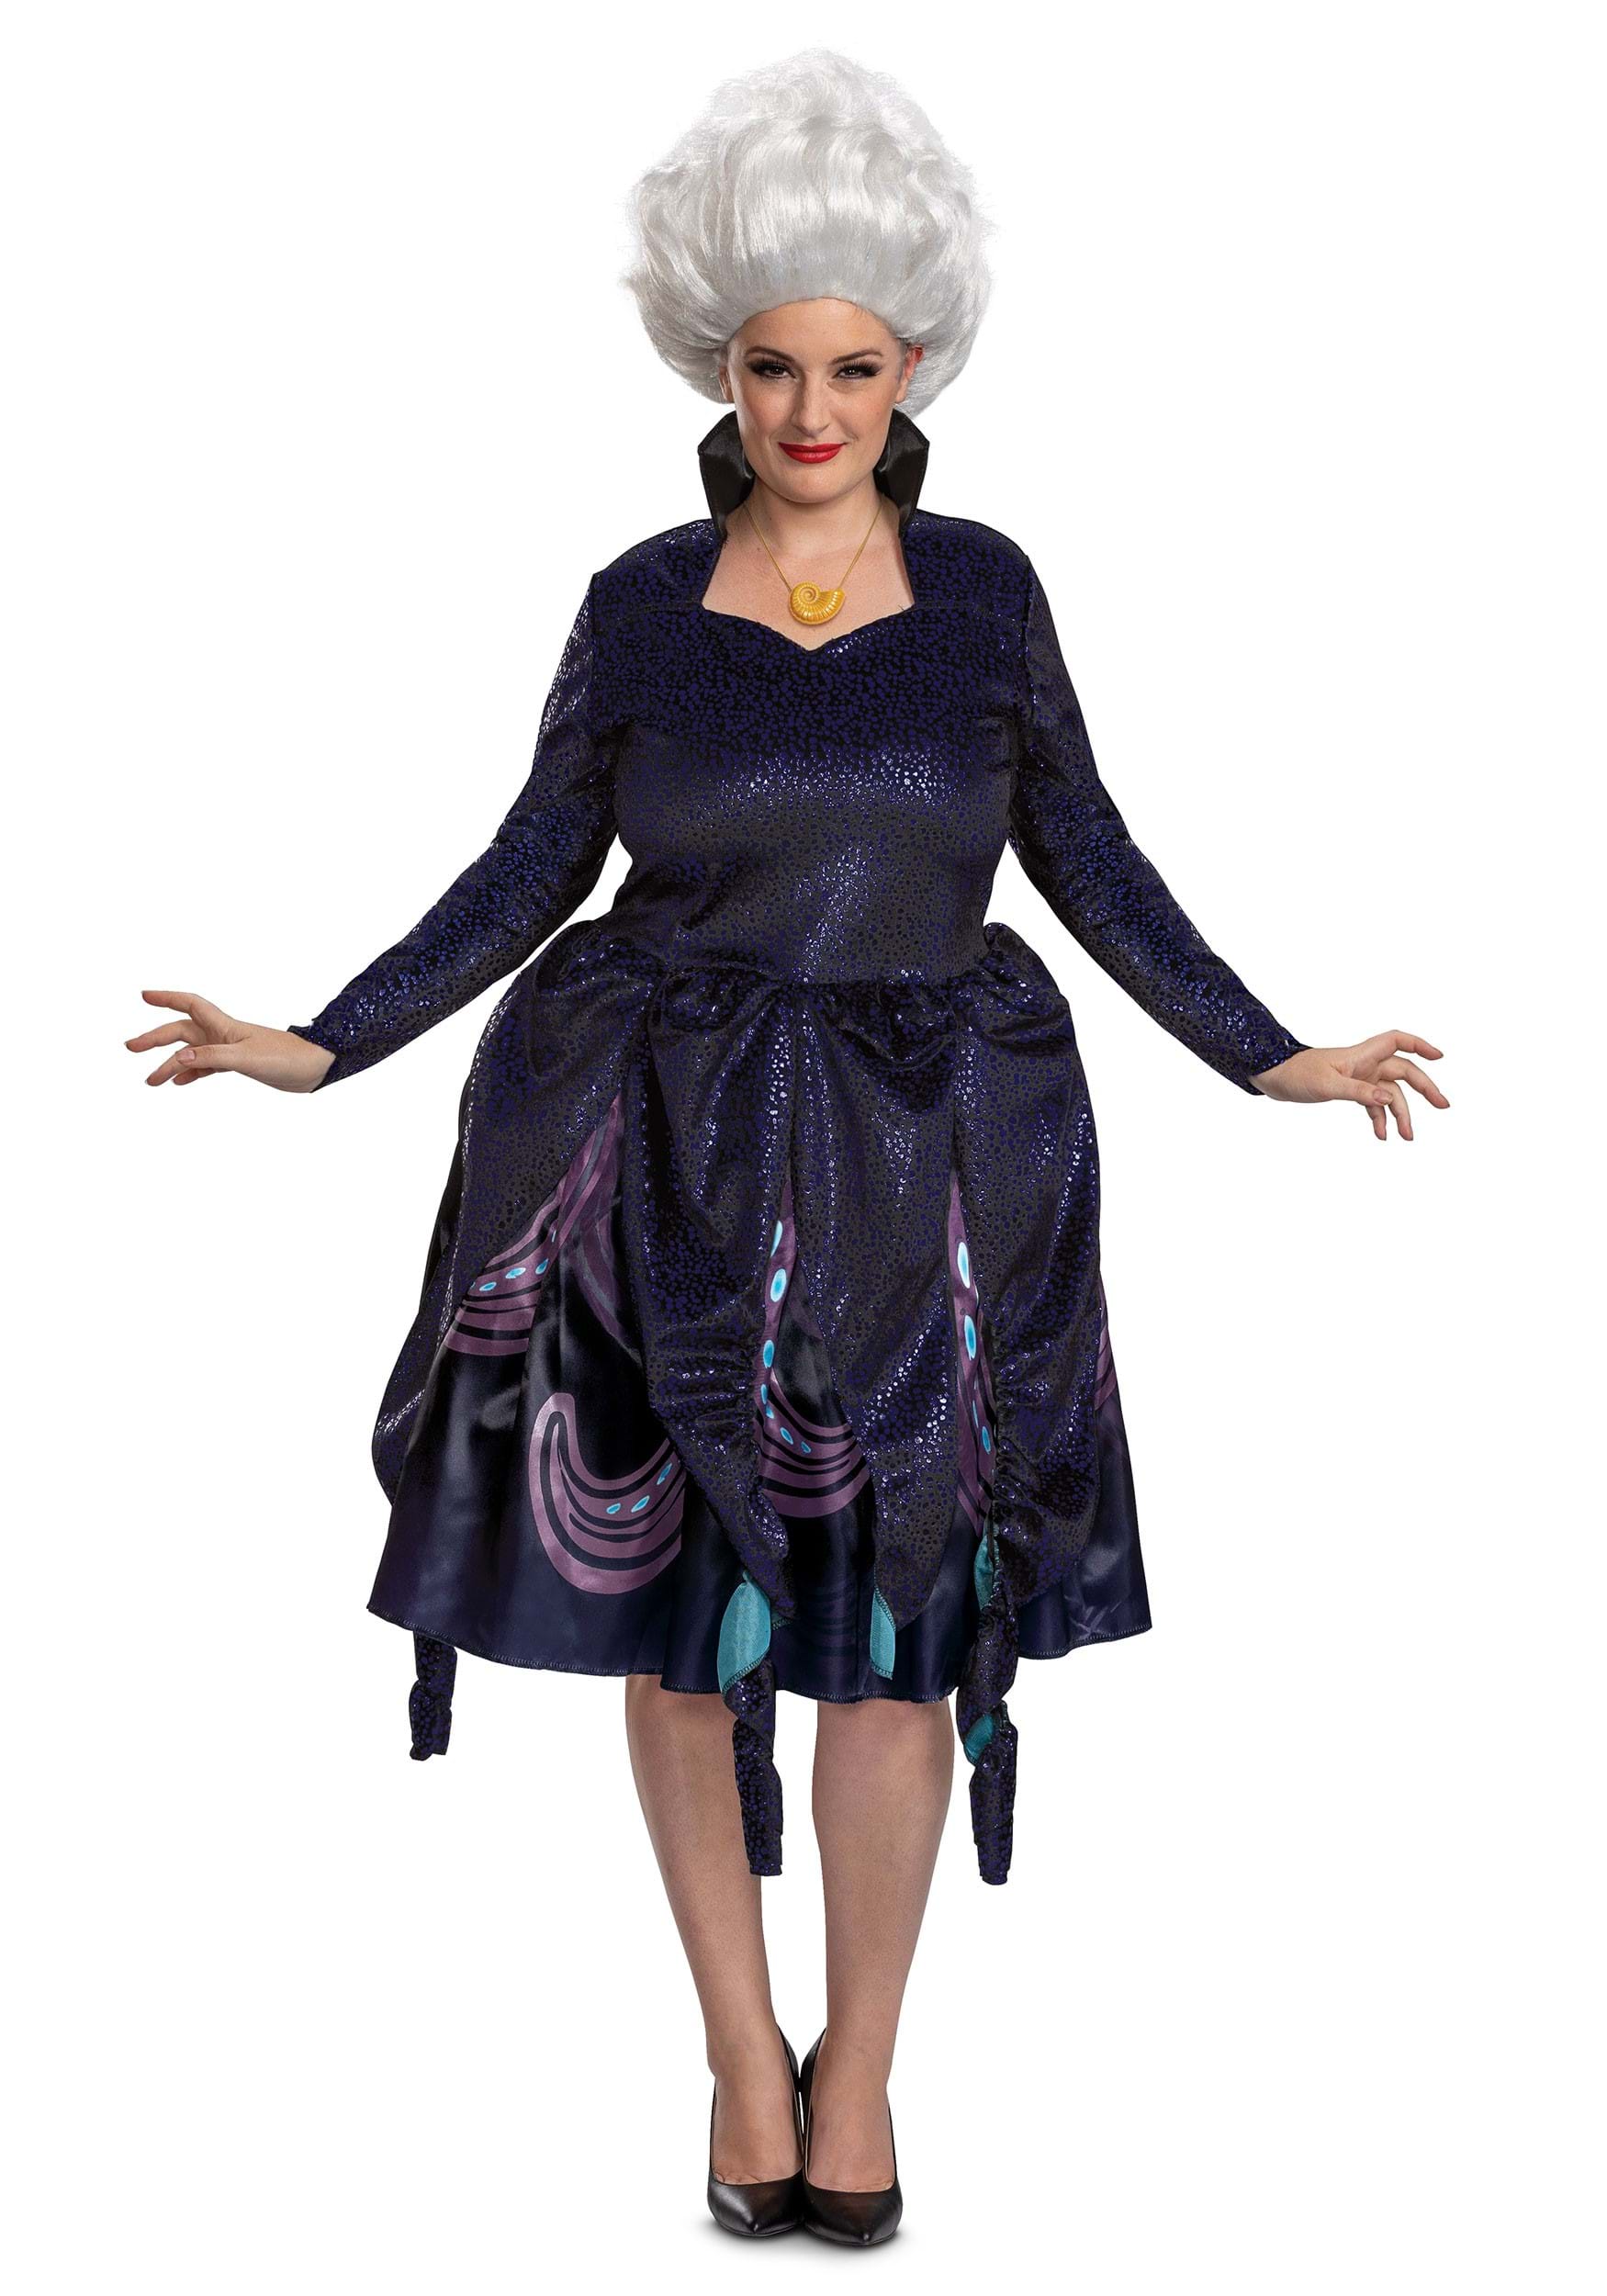 Image of Adult Little Mermaid Live Action Deluxe Ursula Costume ID DI125629-M